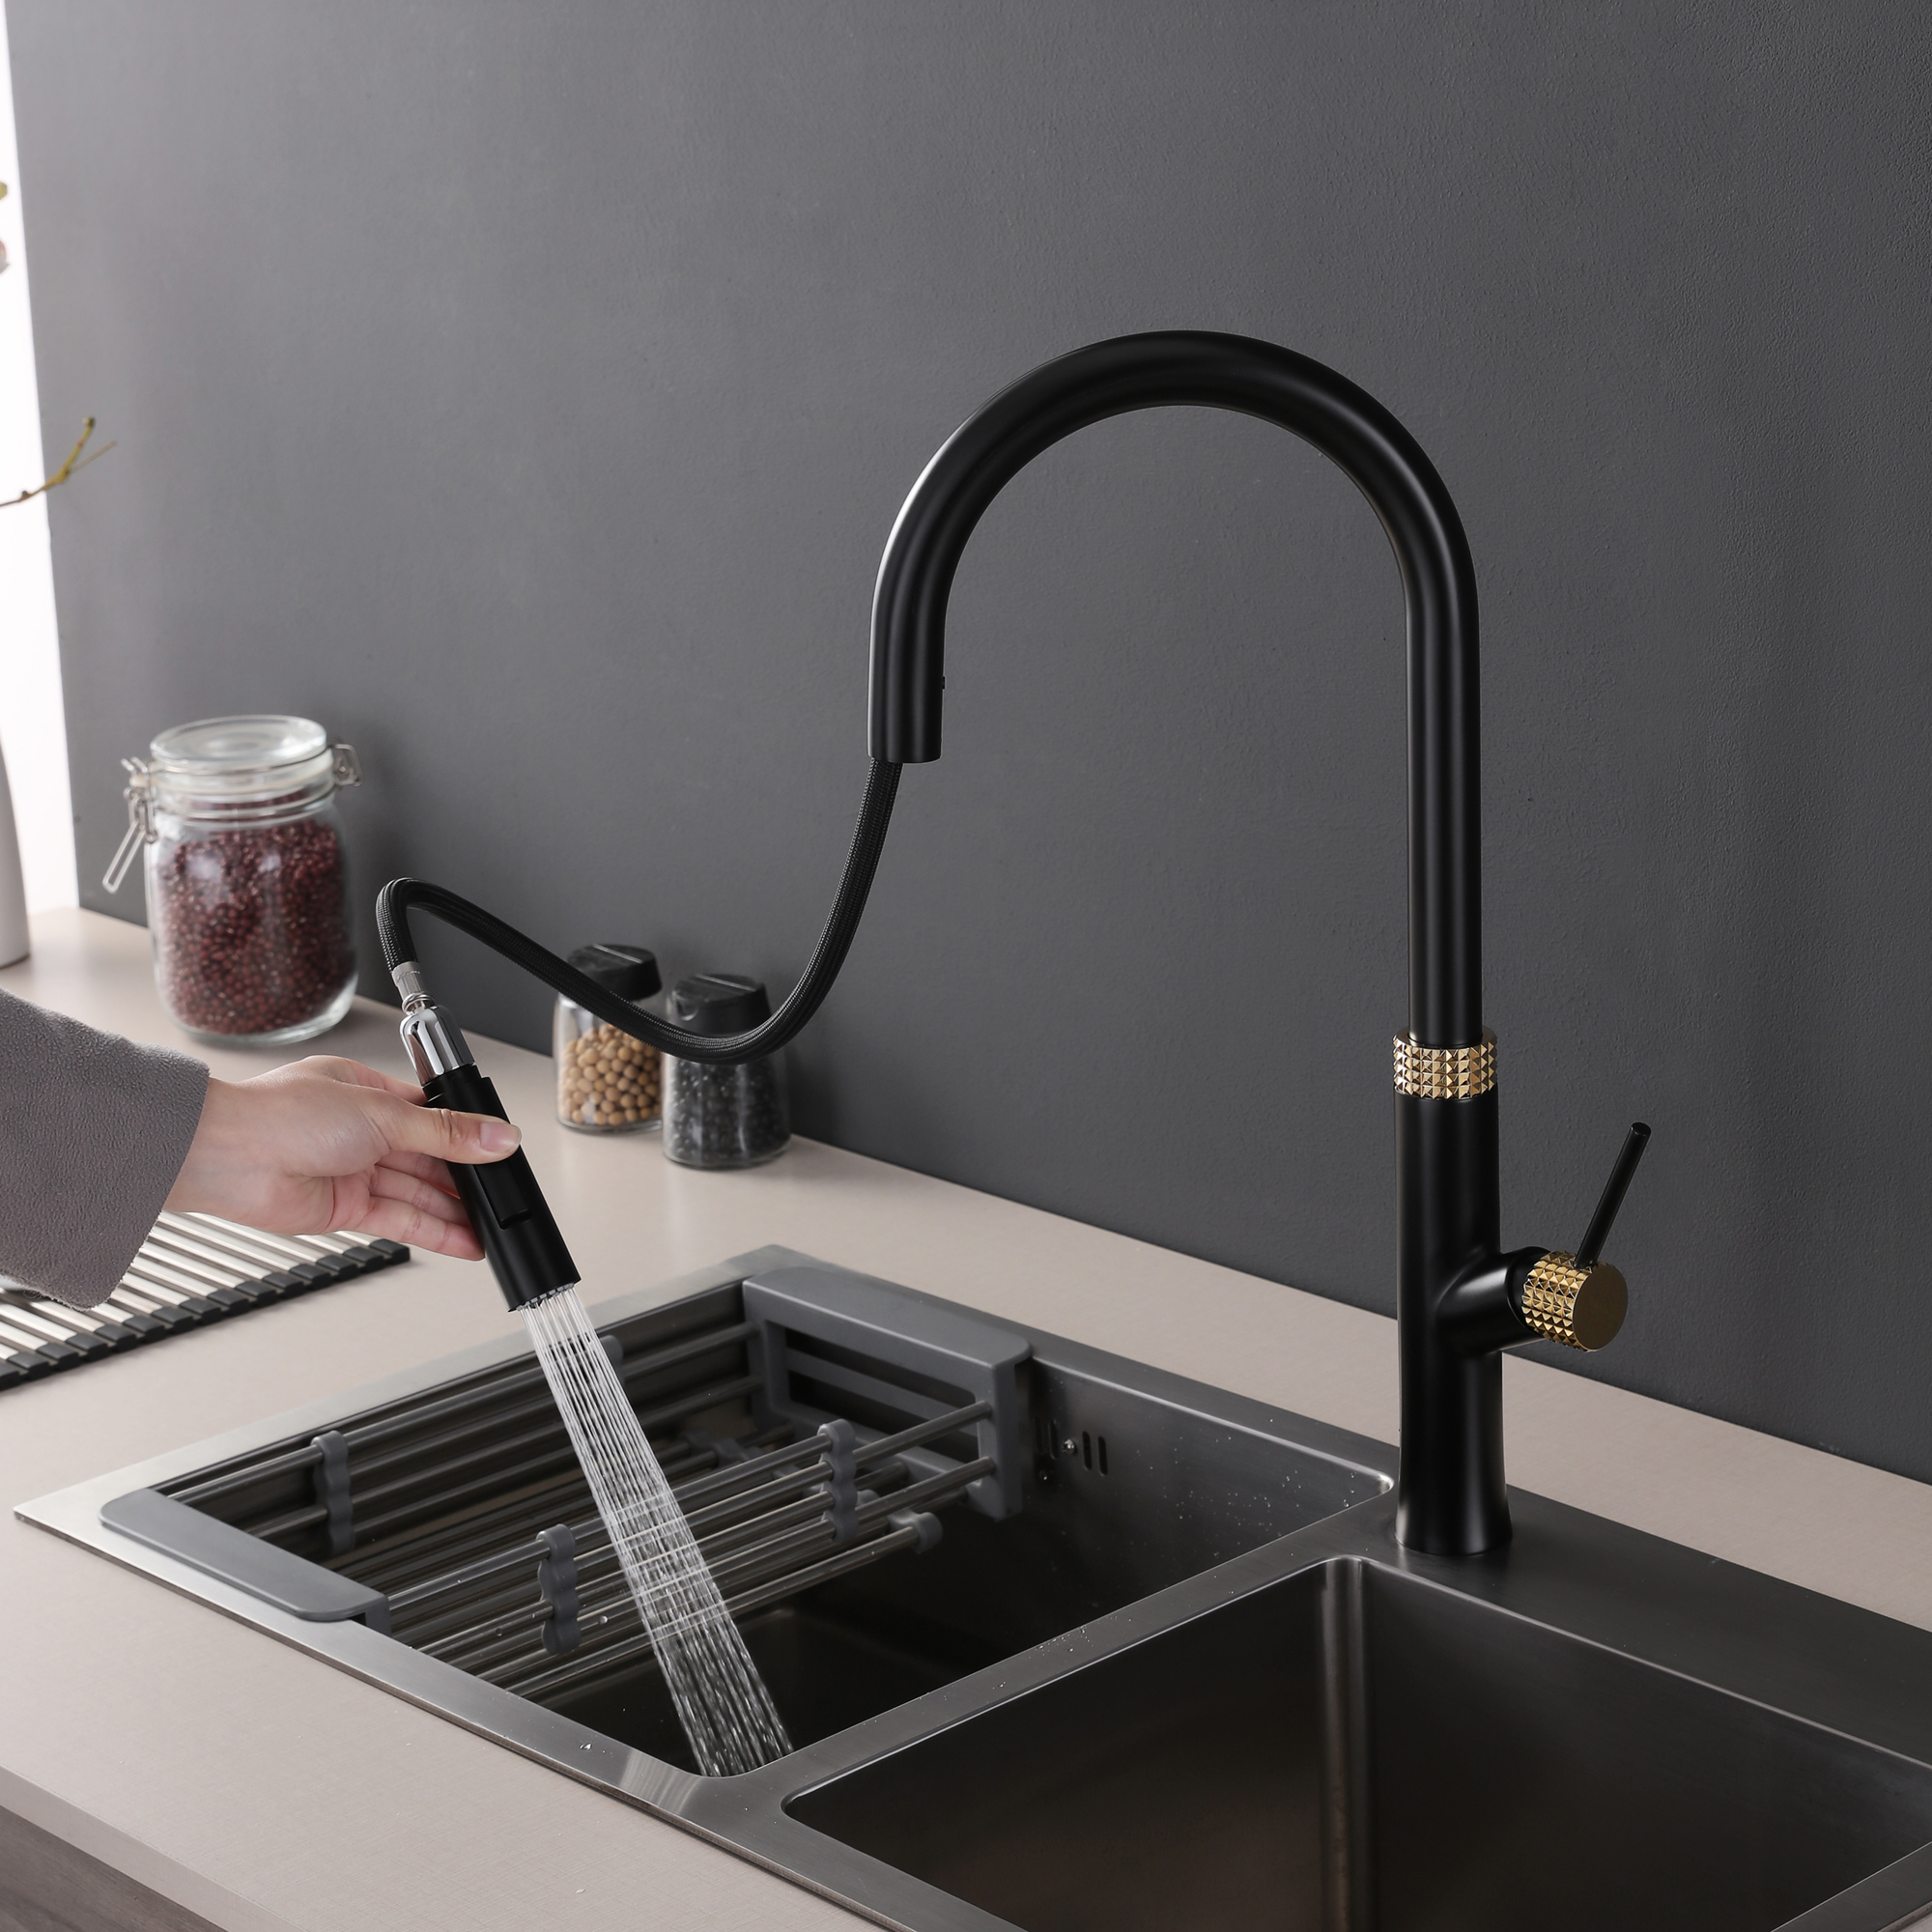 New Design Pipe Matte Black Sink Faucet Kitchen Mixer With Ce Certificate